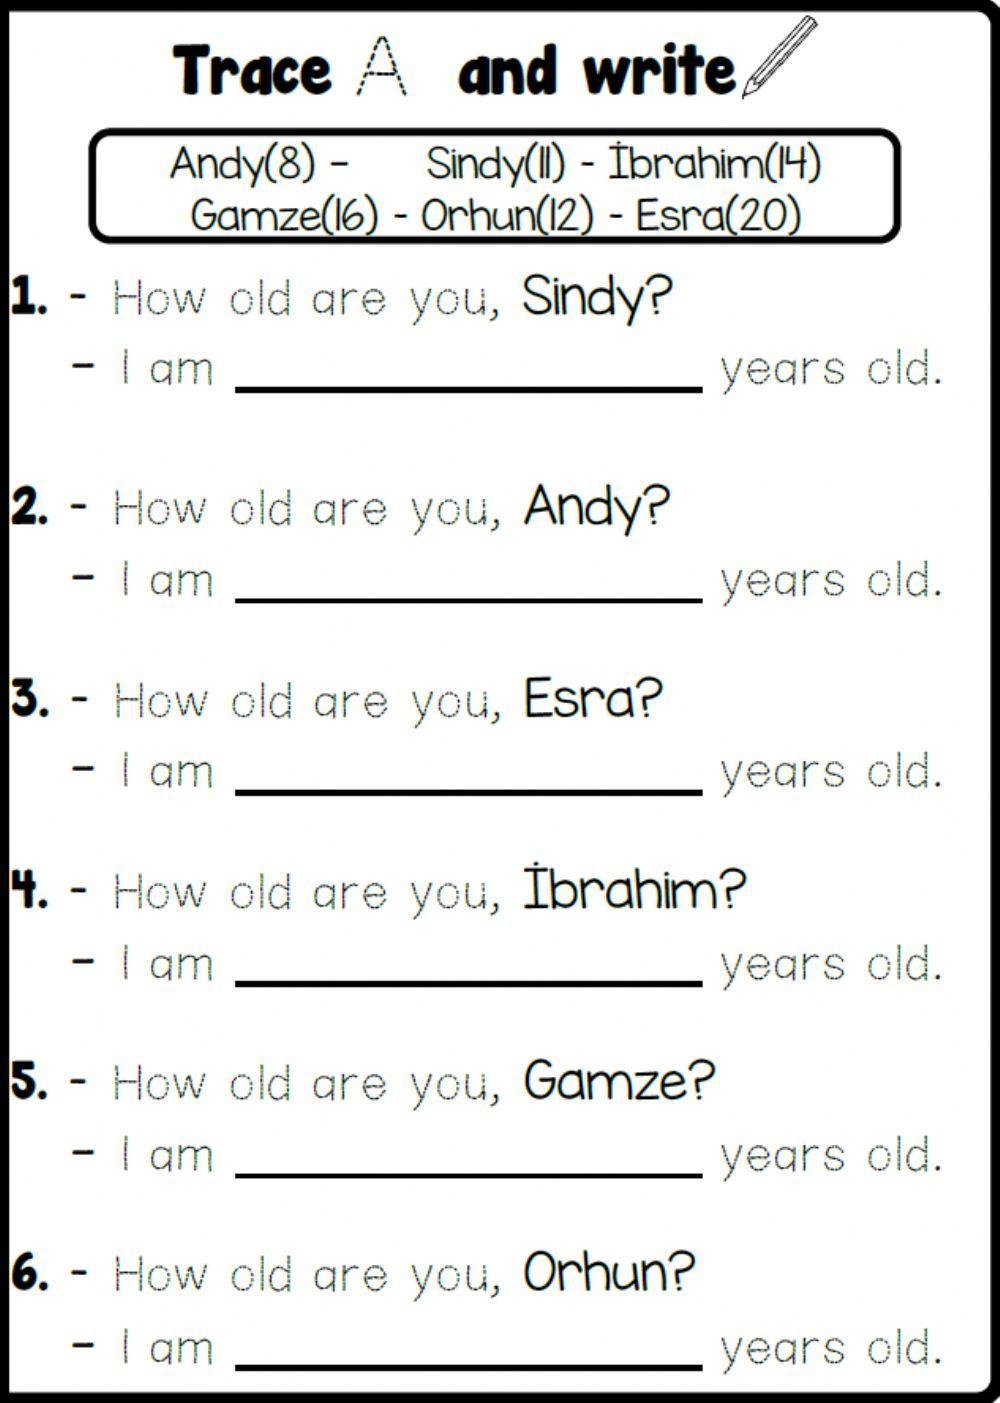 3.1. Greetings - How old are you?